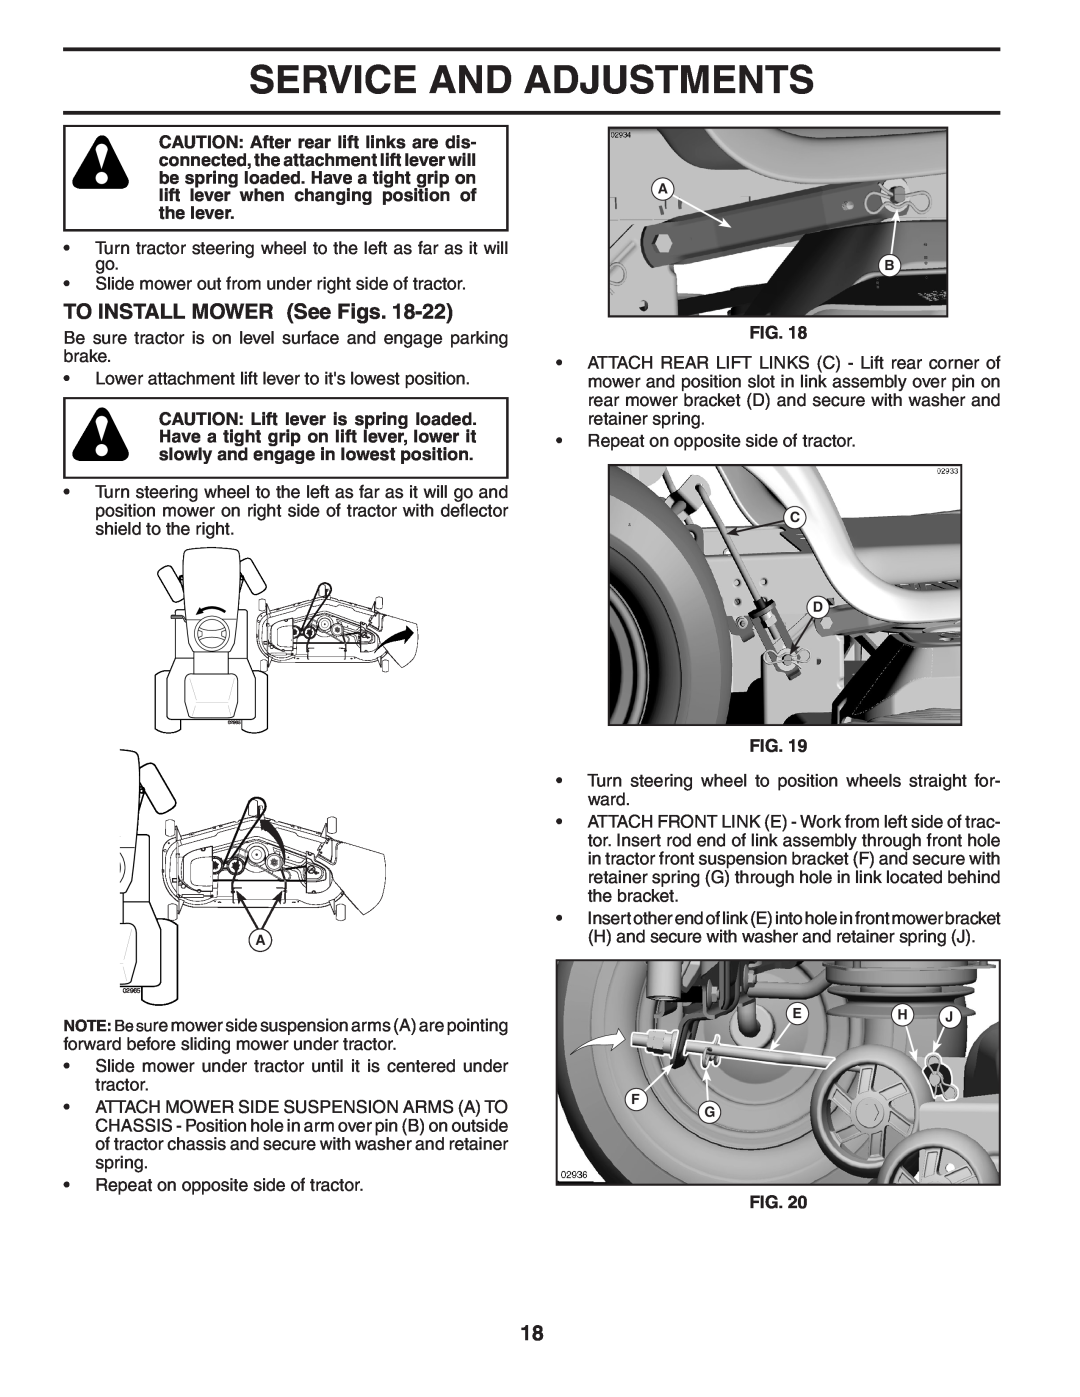 Poulan 96042001000, 402557 manual TO INSTALL MOWER See Figs, Service And Adjustments 